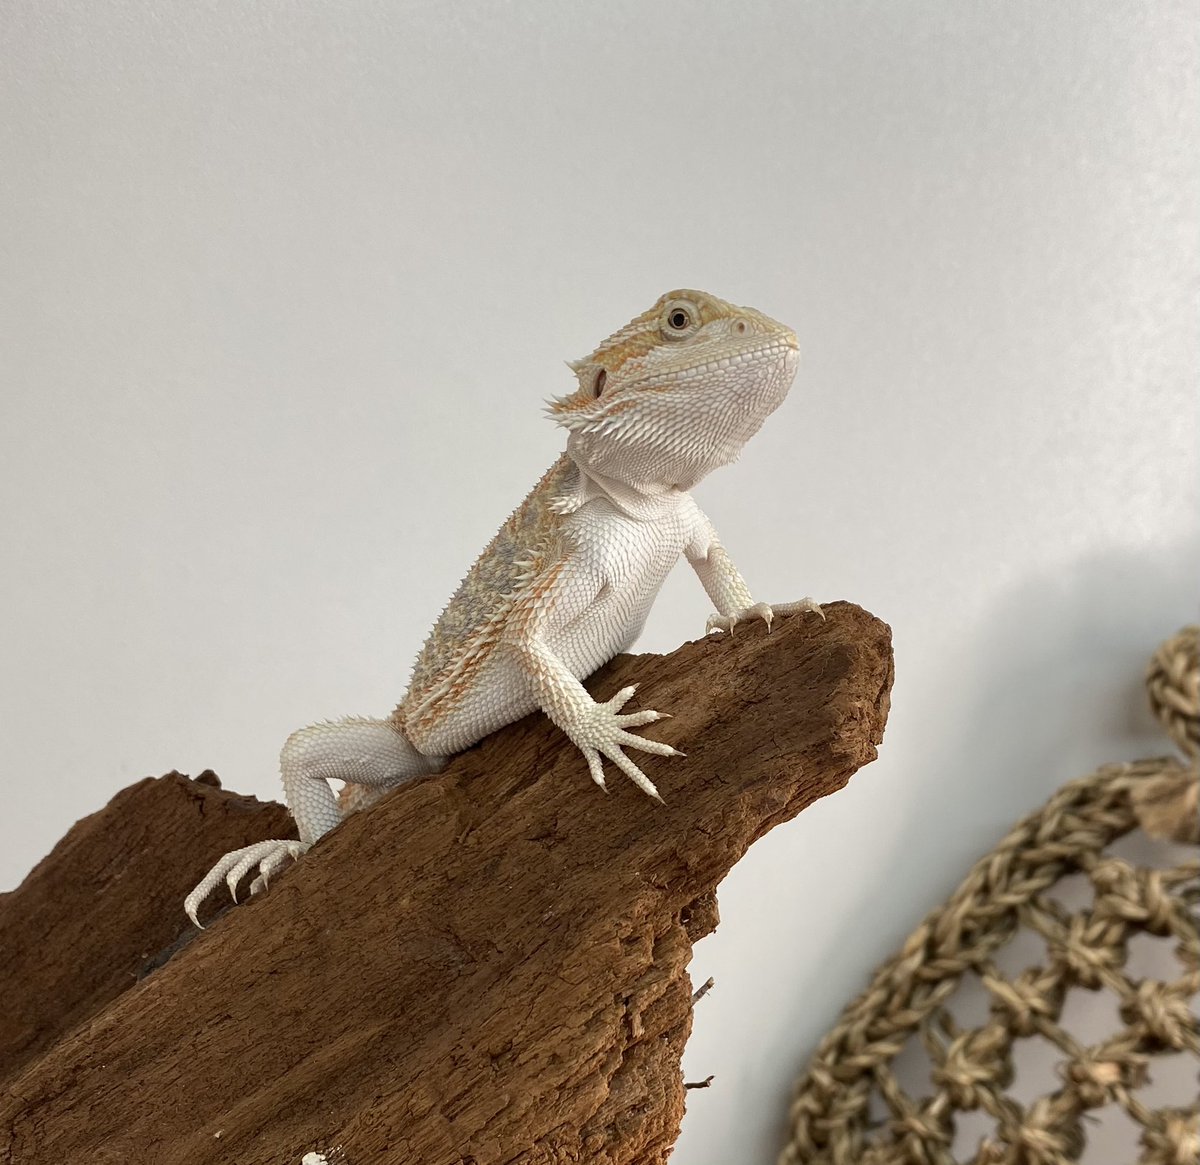 Trying to write a grant but can’t stop watching our new pet, Mango. Bearded dragons are so cool.